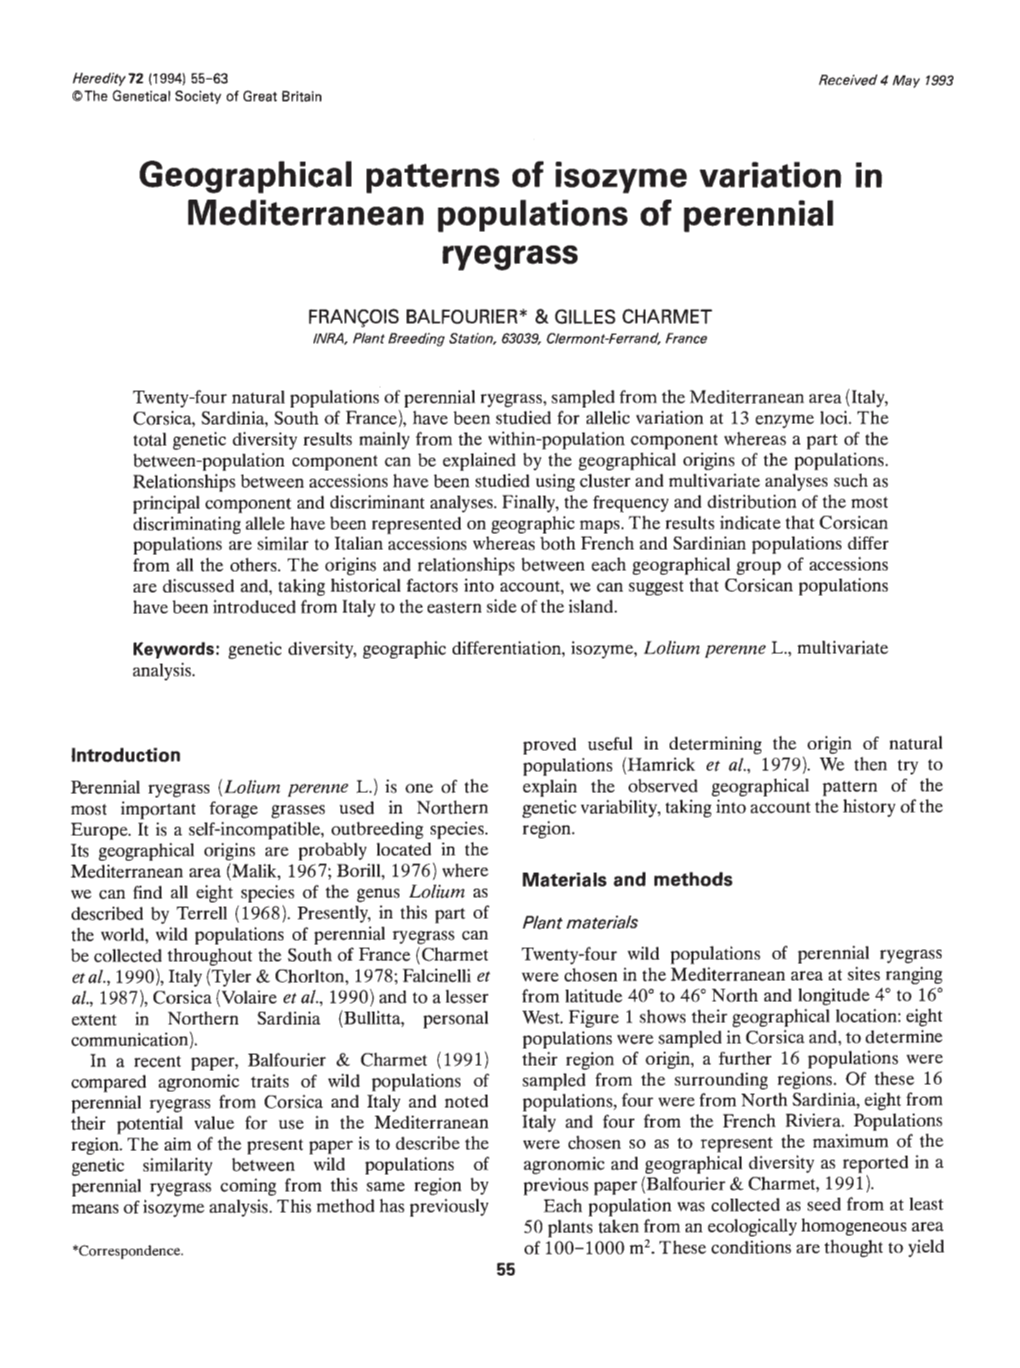 Geographical Patterns of Isozyme Variation in Mediterranean Populations of Perennial Ryegrass